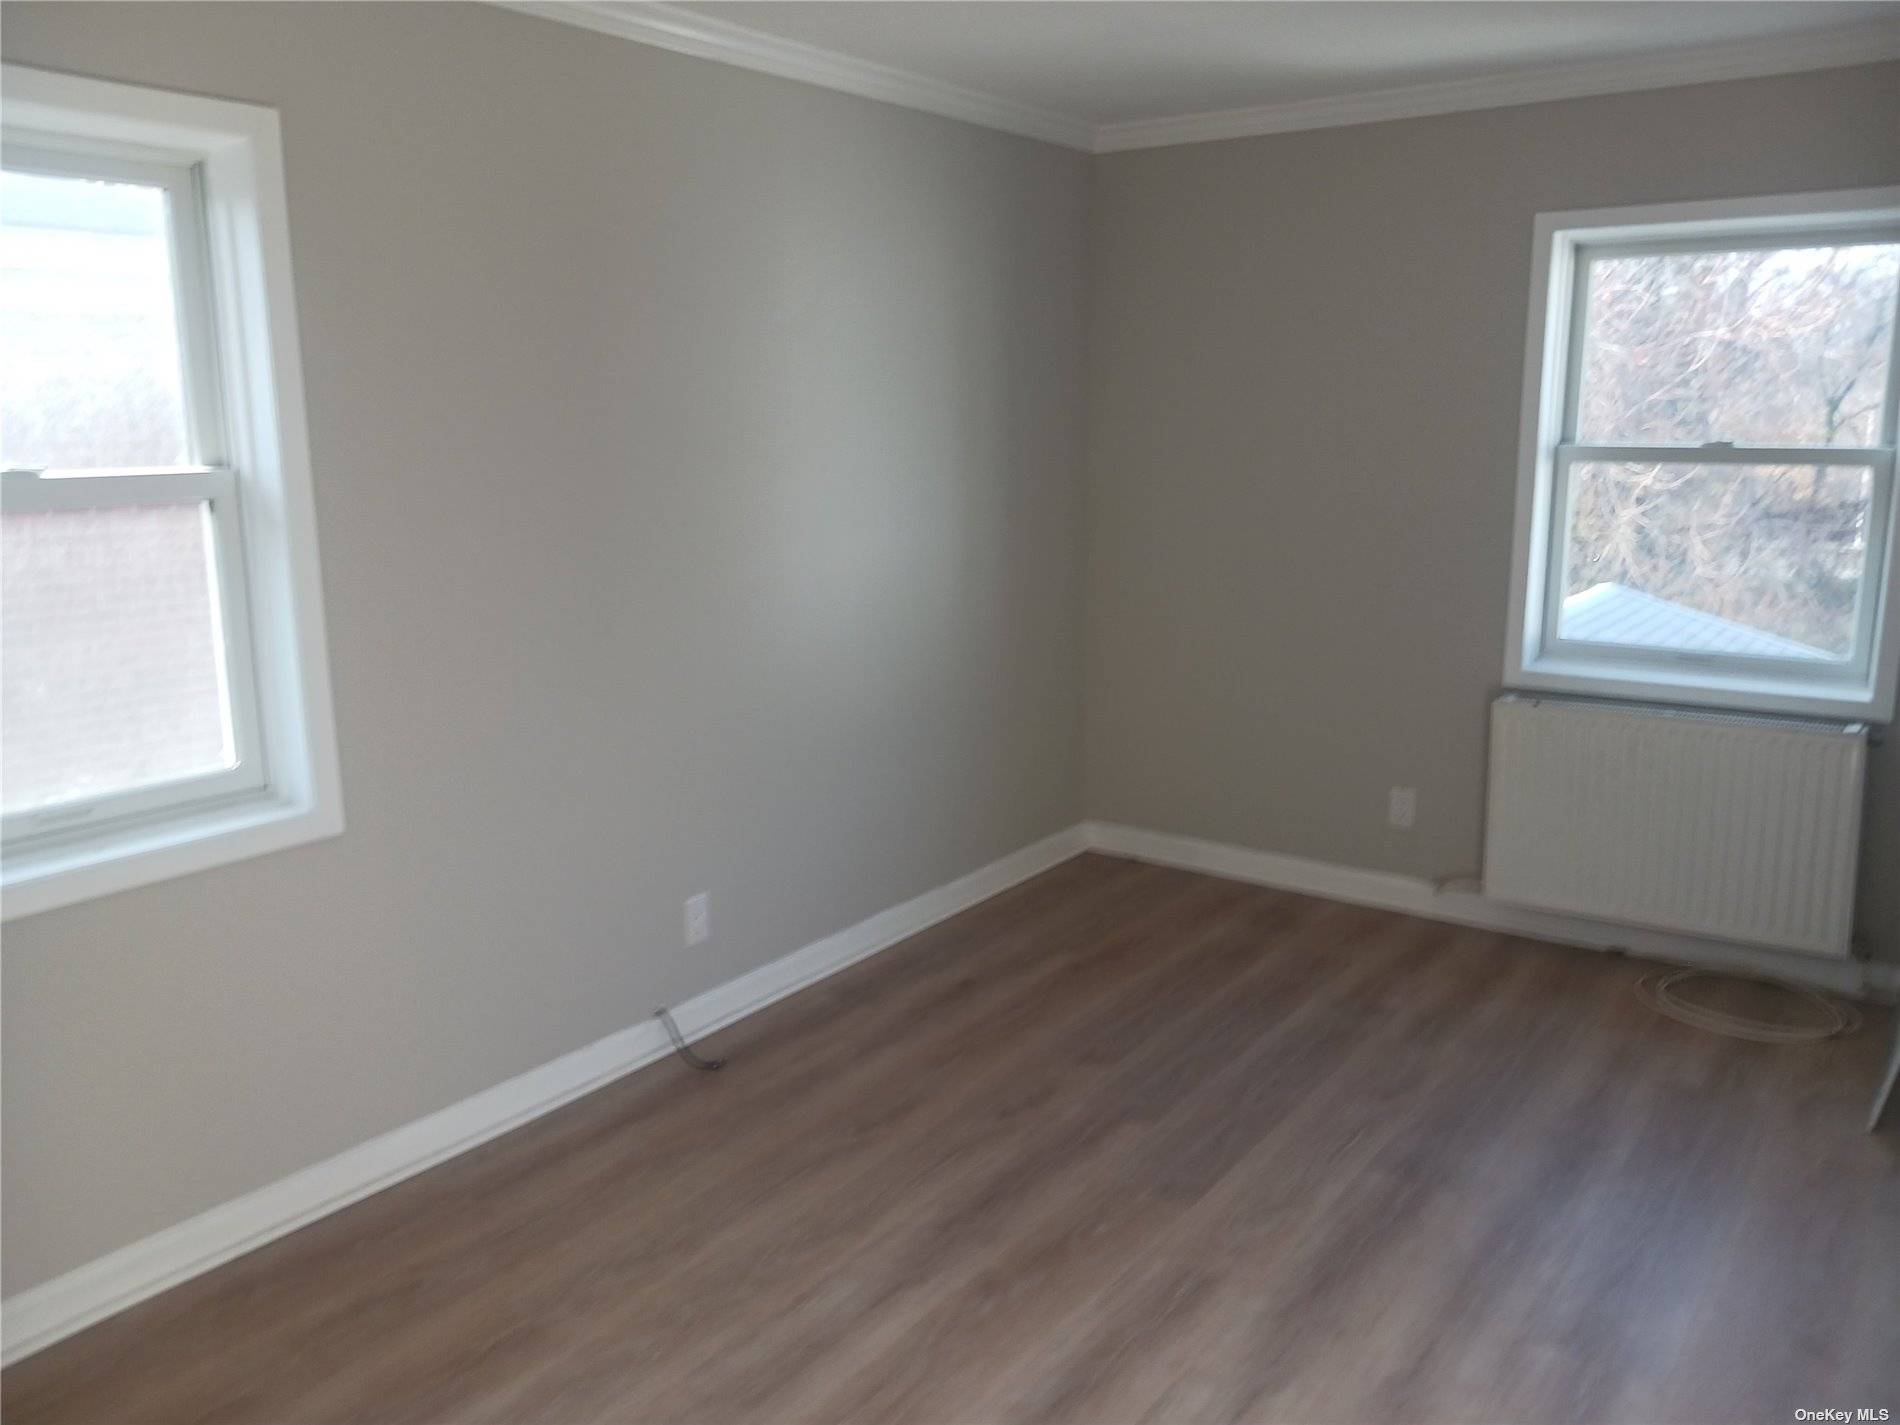 Newly renovated Apt on 2nd floor new appliances master br with own both wood floors throughout walk to Q5 Q85 and LIRR.